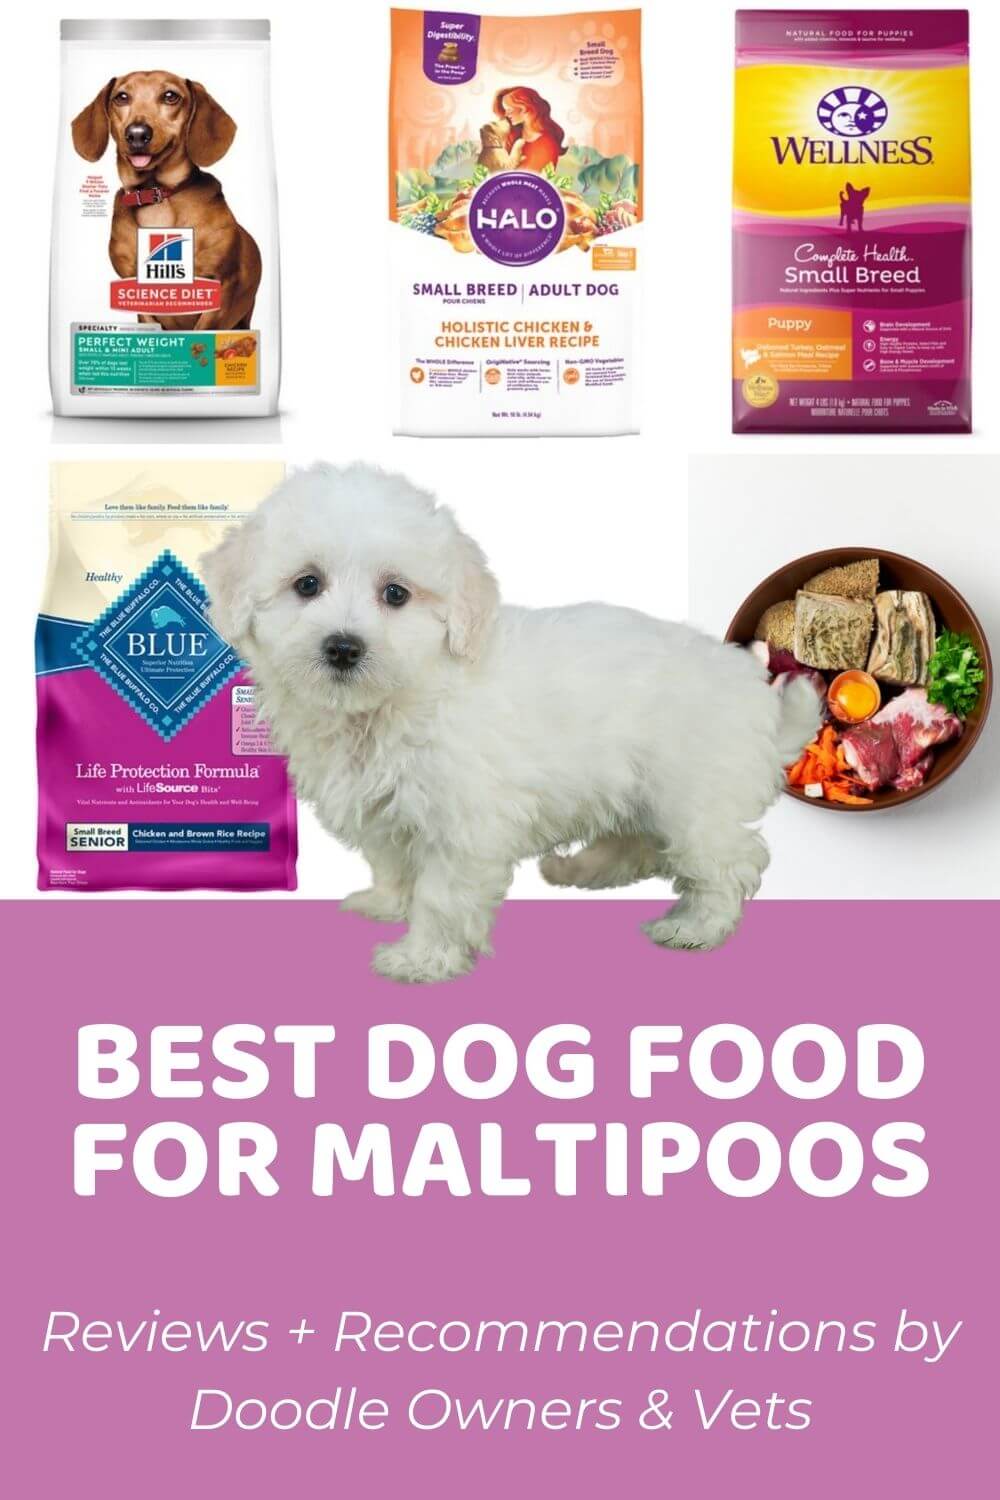 6 Best Dog Food for Maltipoos Based on Real Owner Reviews Reviews + Recommendations by Doodle Owners & Vets